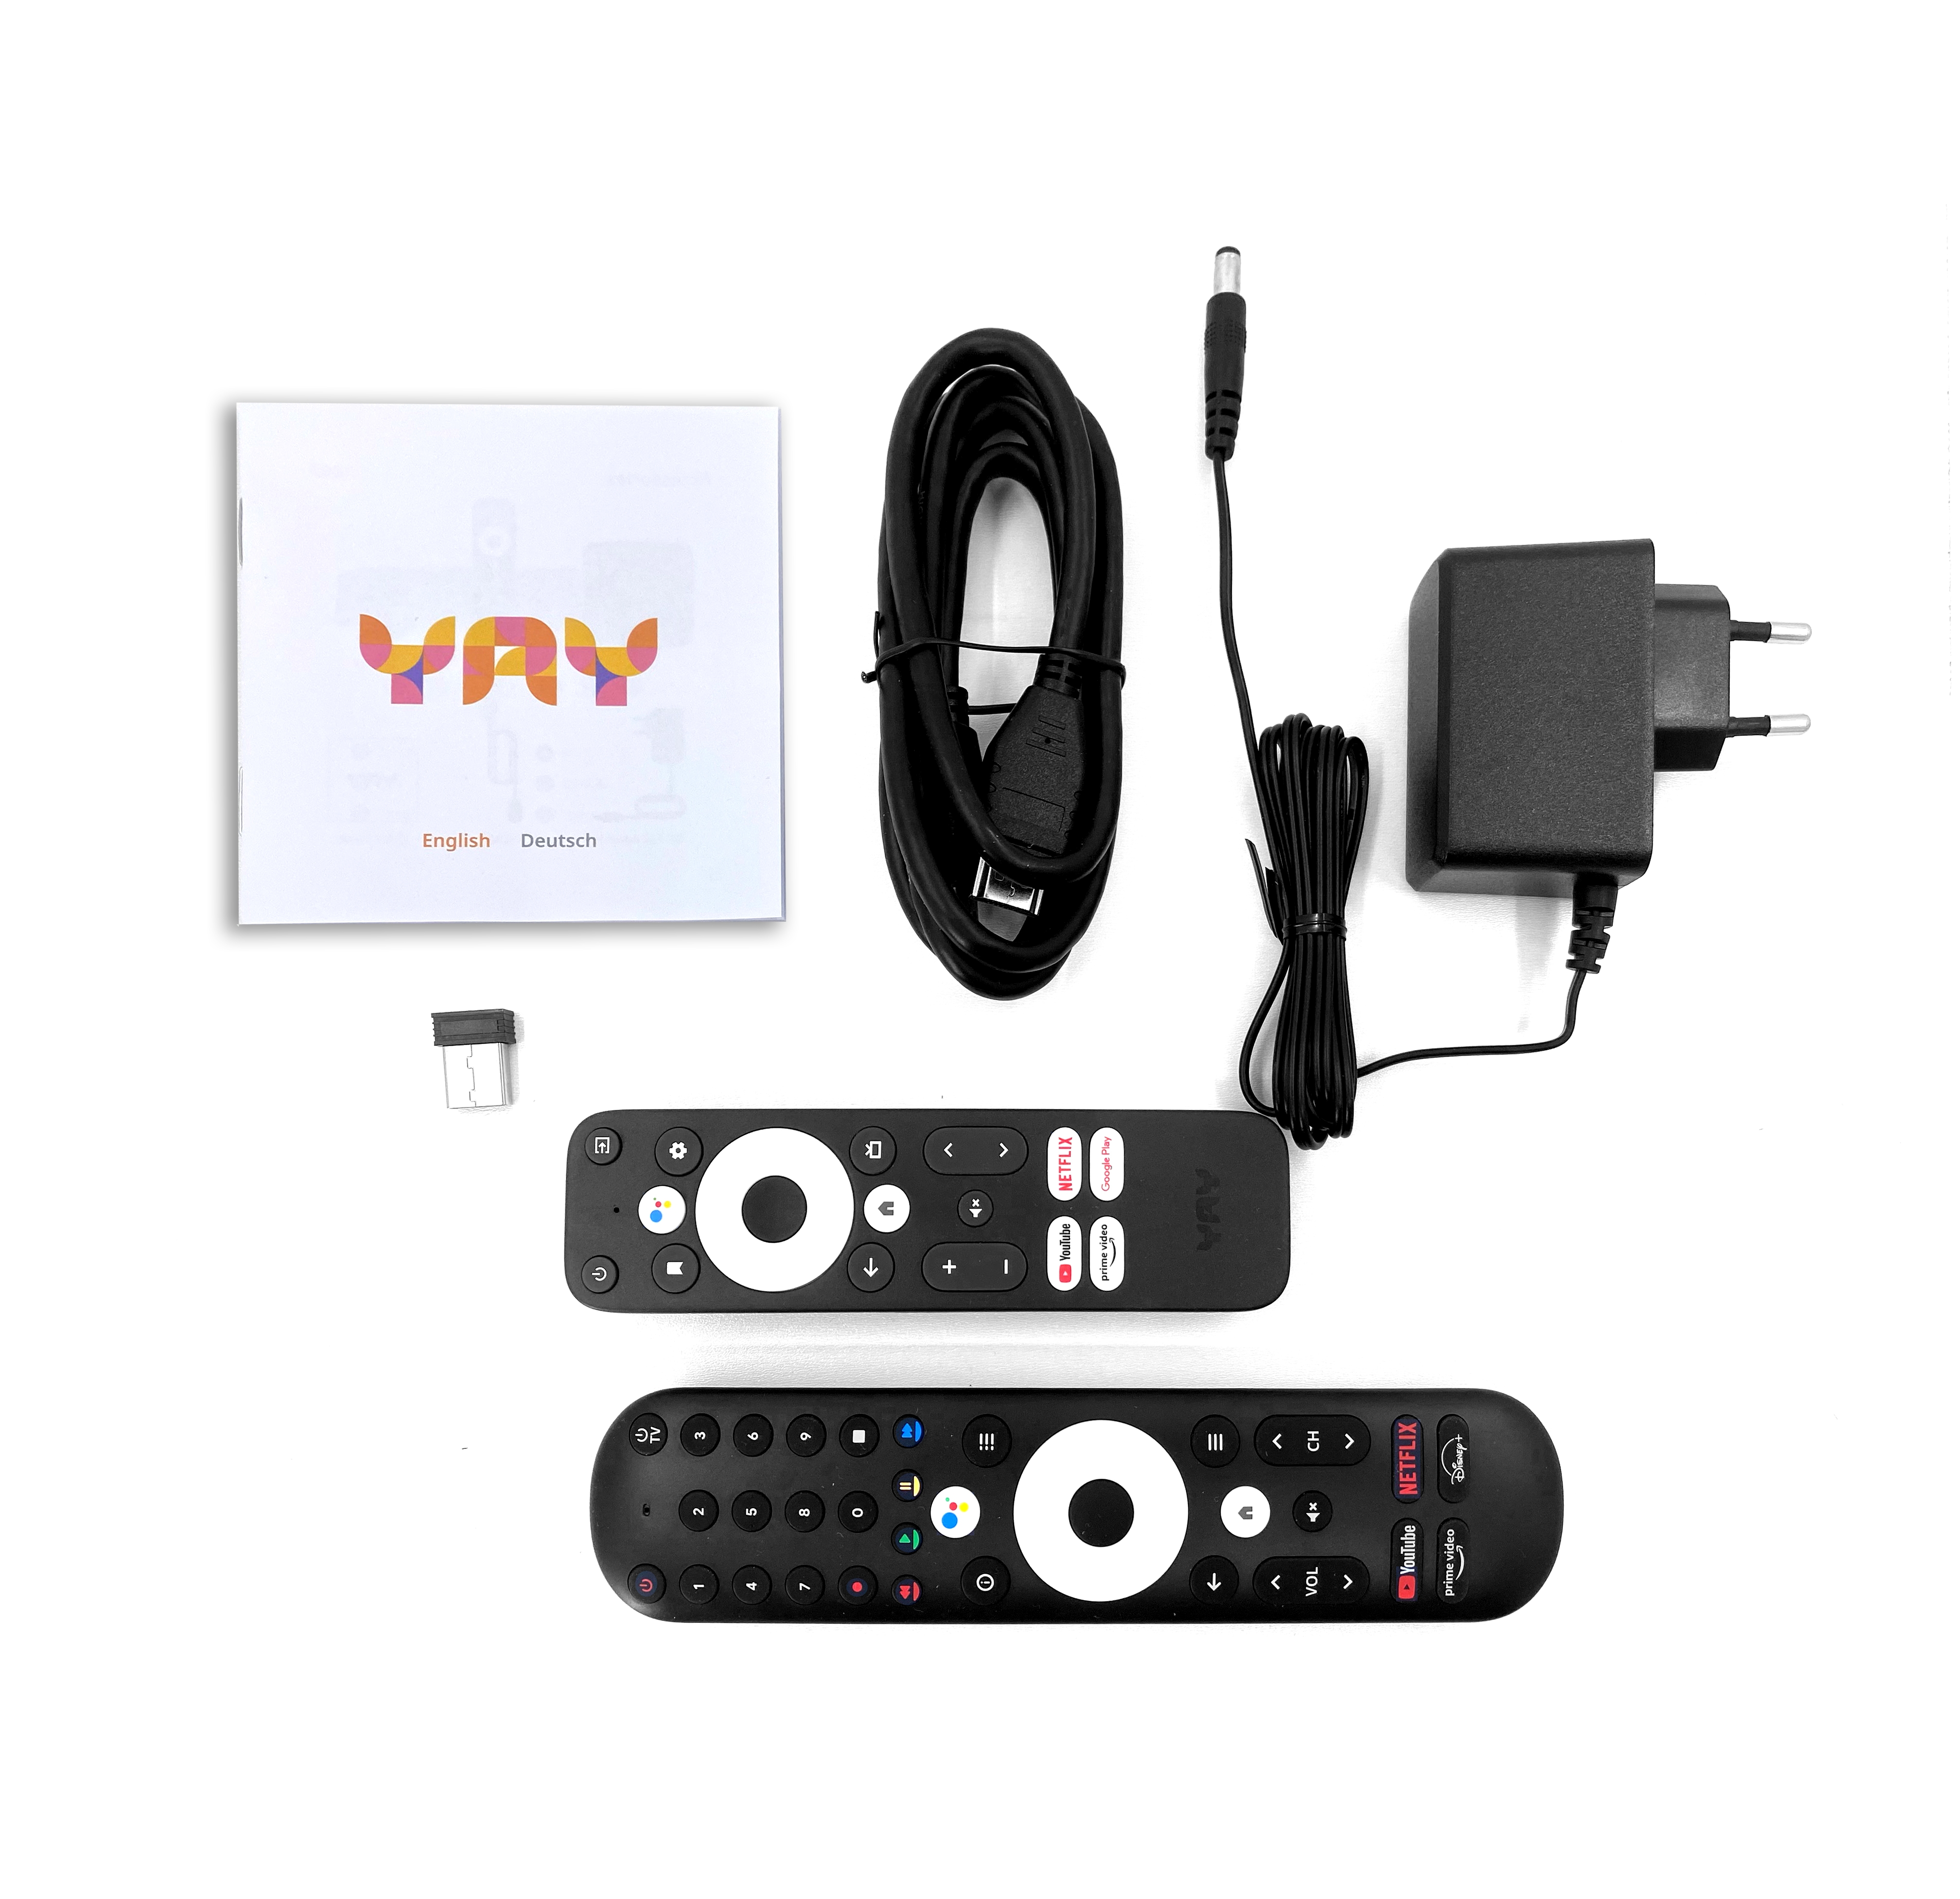 VU+ YAY GO PRO Android TV HIGH-END 4K UHD Streaming Box Android 10.0 und Chromecast integriert